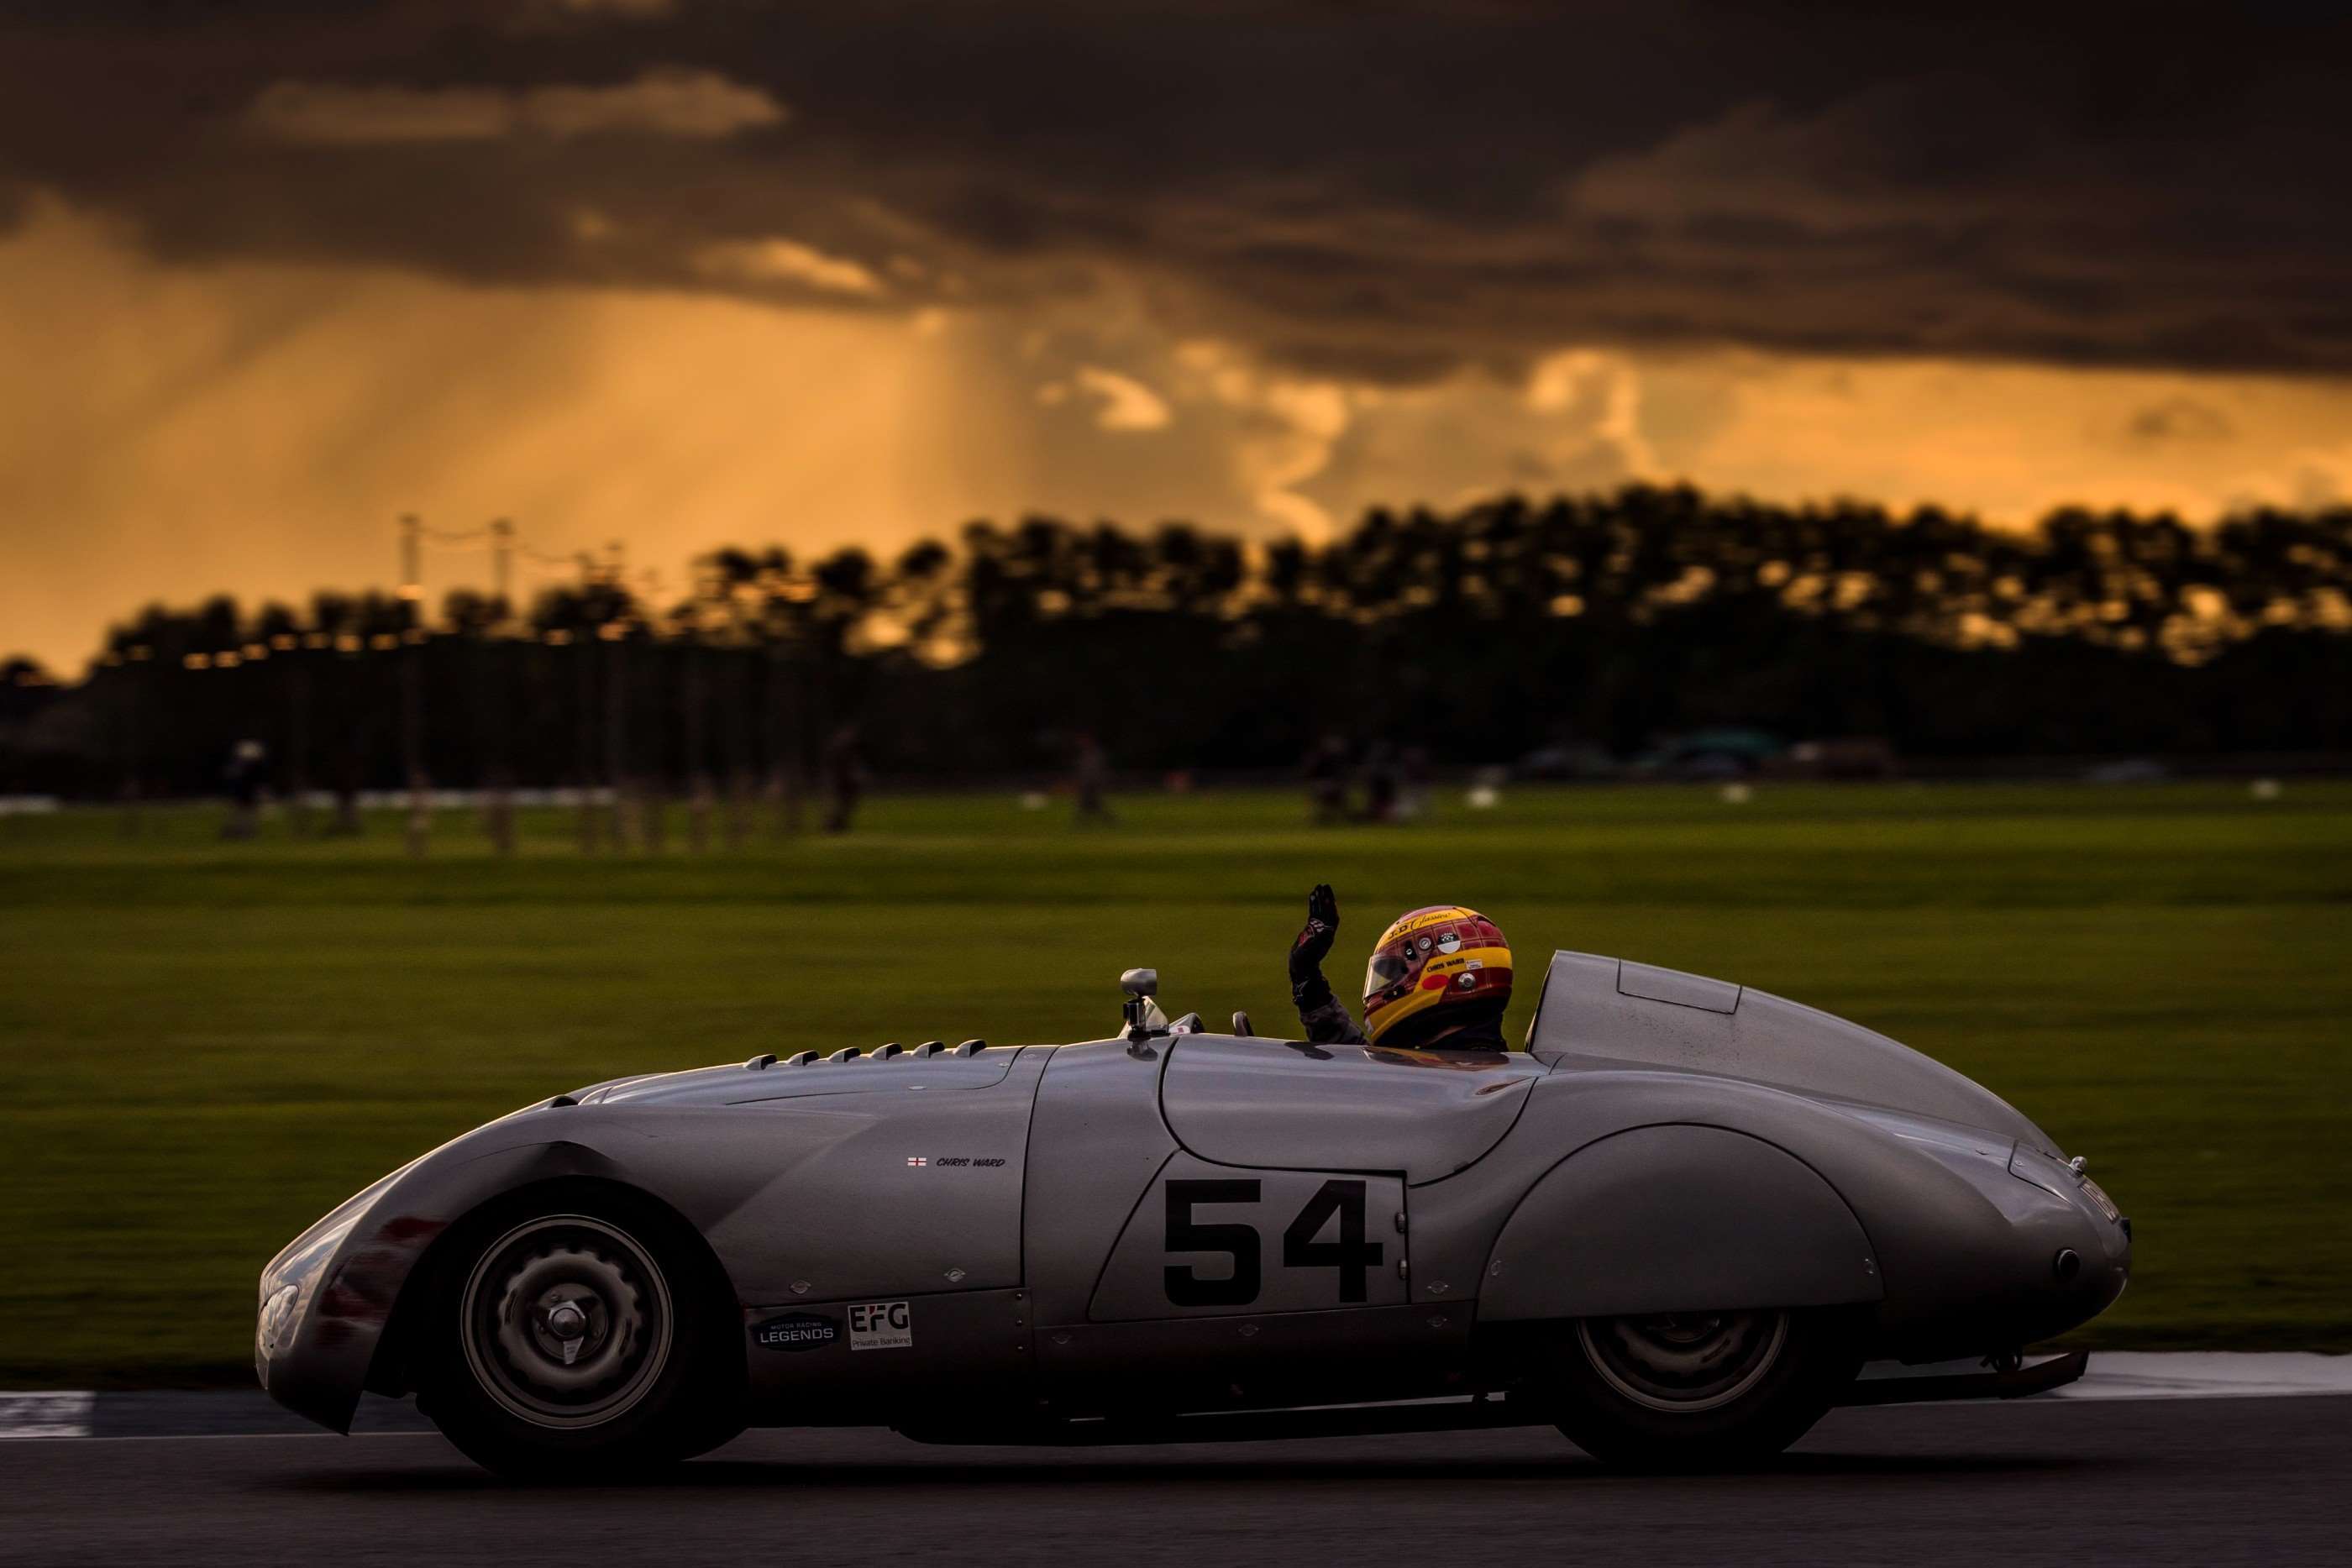 goodwood_revival_drew_gibson_snappers_selection_28092017_5549.jpg